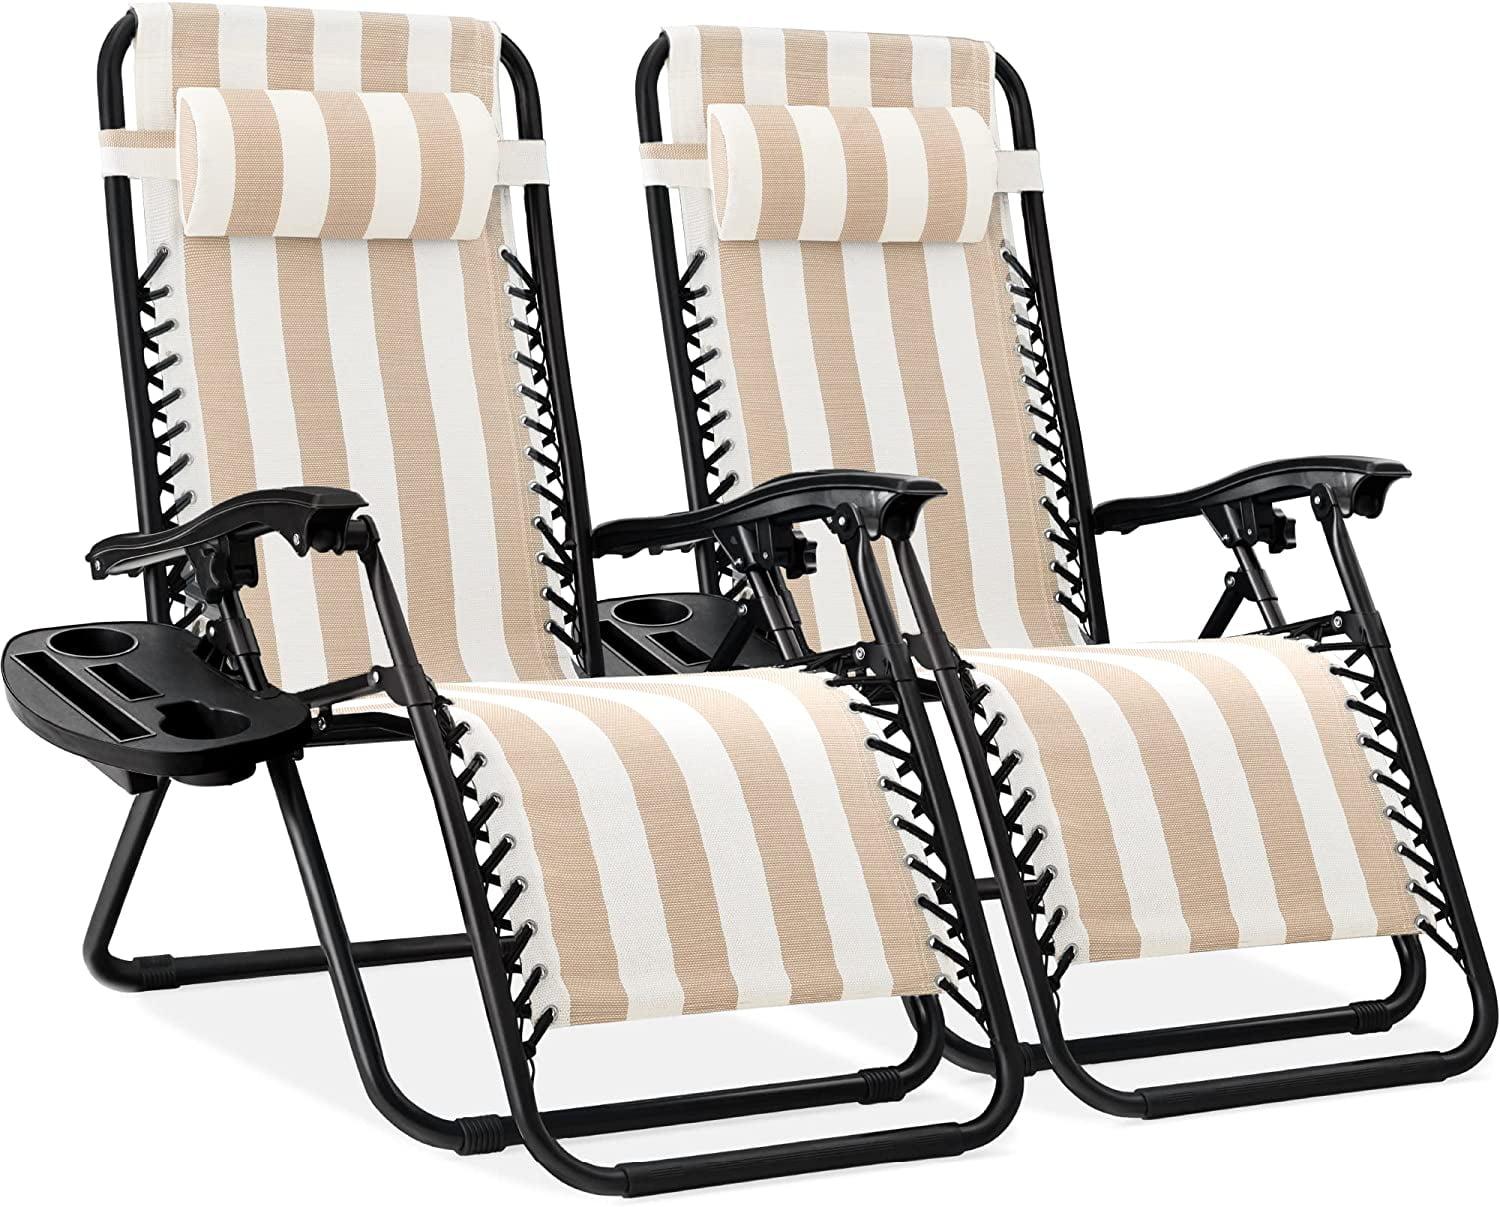 Coastal Tan Striped Zero Gravity Lounge Chair with Cup Holder